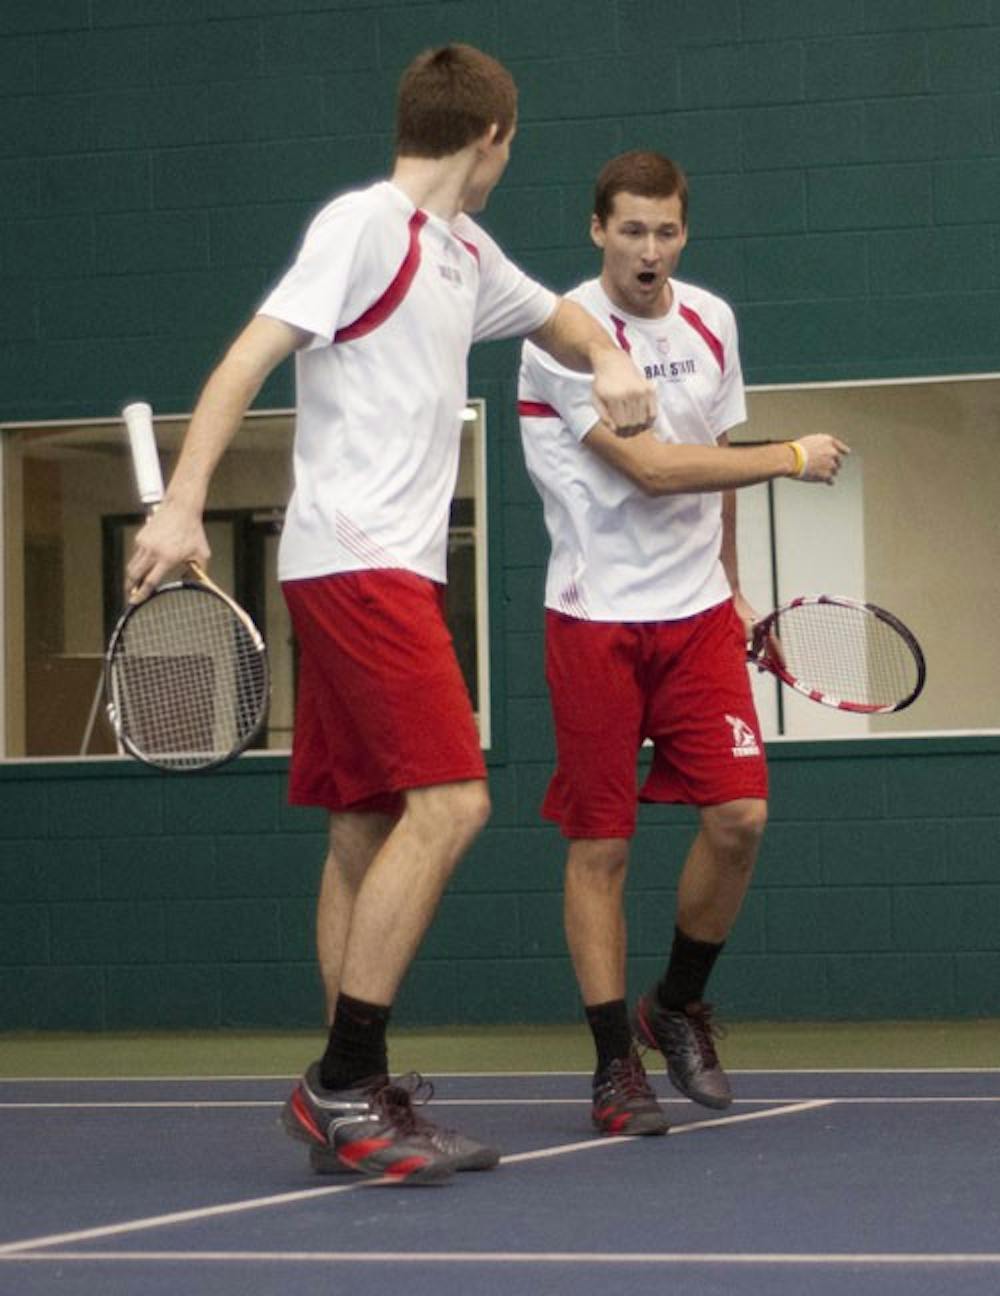 Senior Dalton Albertin, right, and sophomore Ray Leonard congratulate each other after winning a doubles game. DN PHOTO BOBBY ELLIS